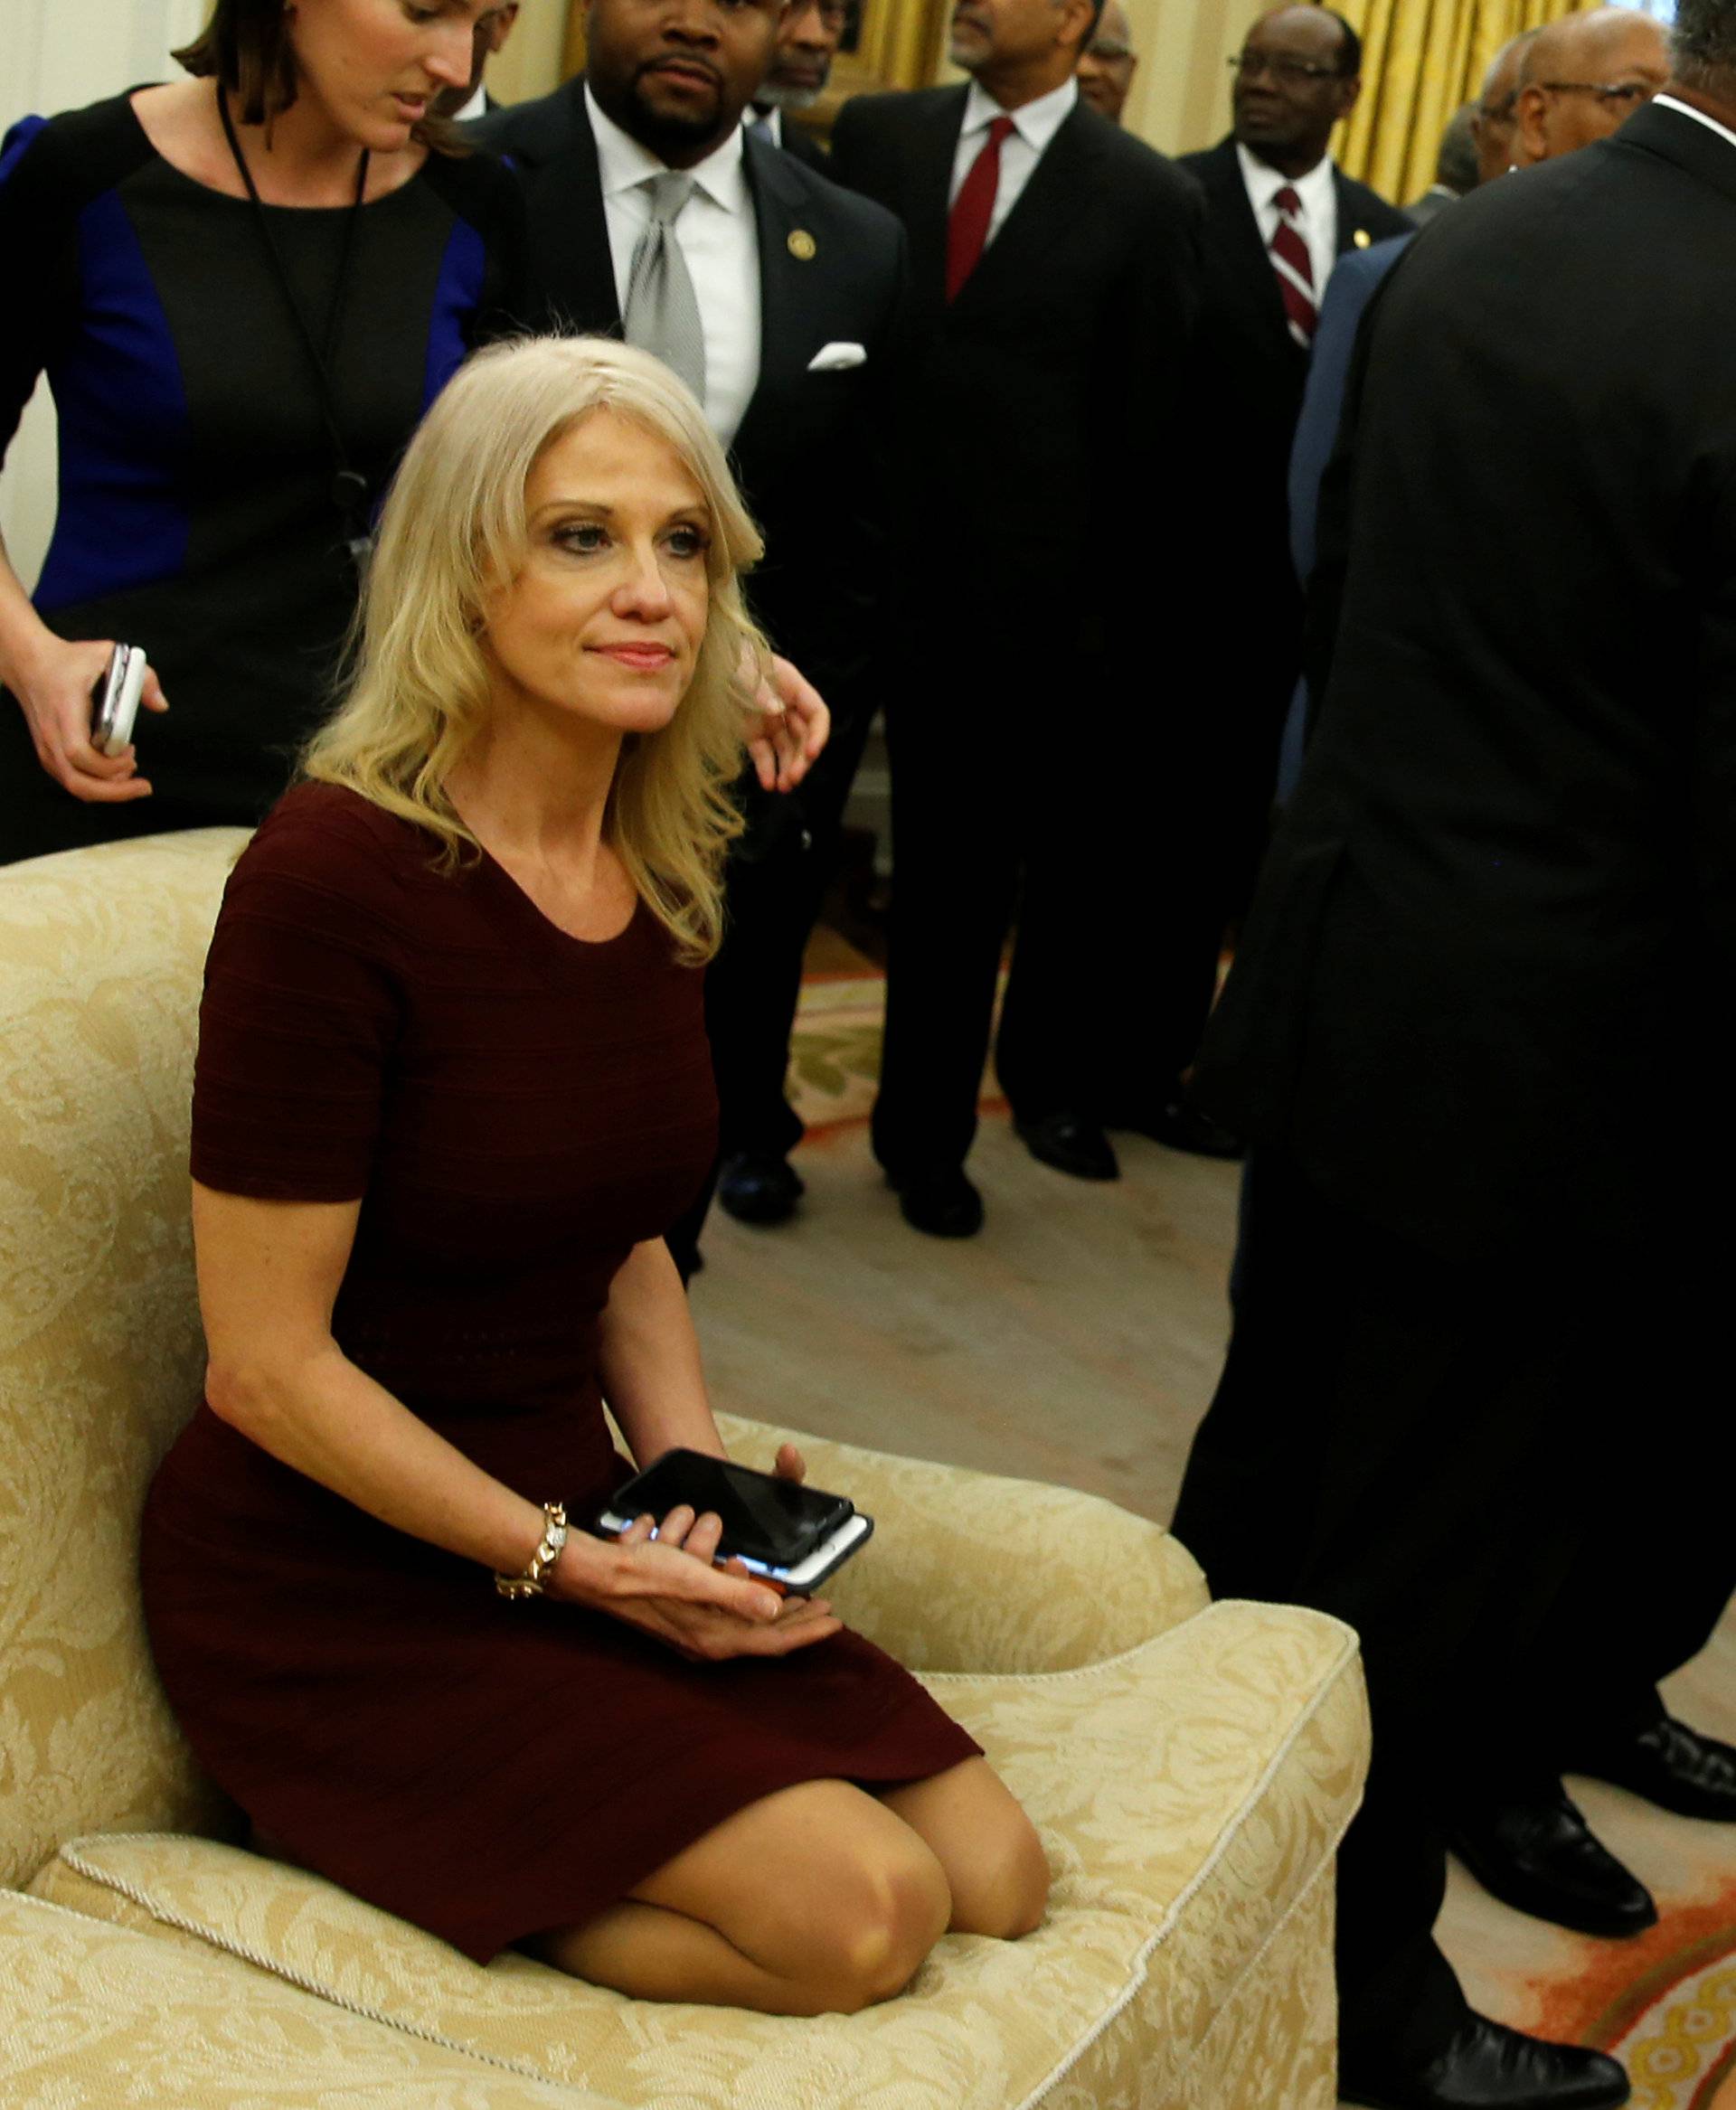 Senior advisor Kellyanne Conway sits on a couch as U.S. President Donald Trump welcomes the leaders of dozens of historically black colleges and universities (HBCU) in the Oval Office at the White House in Washington